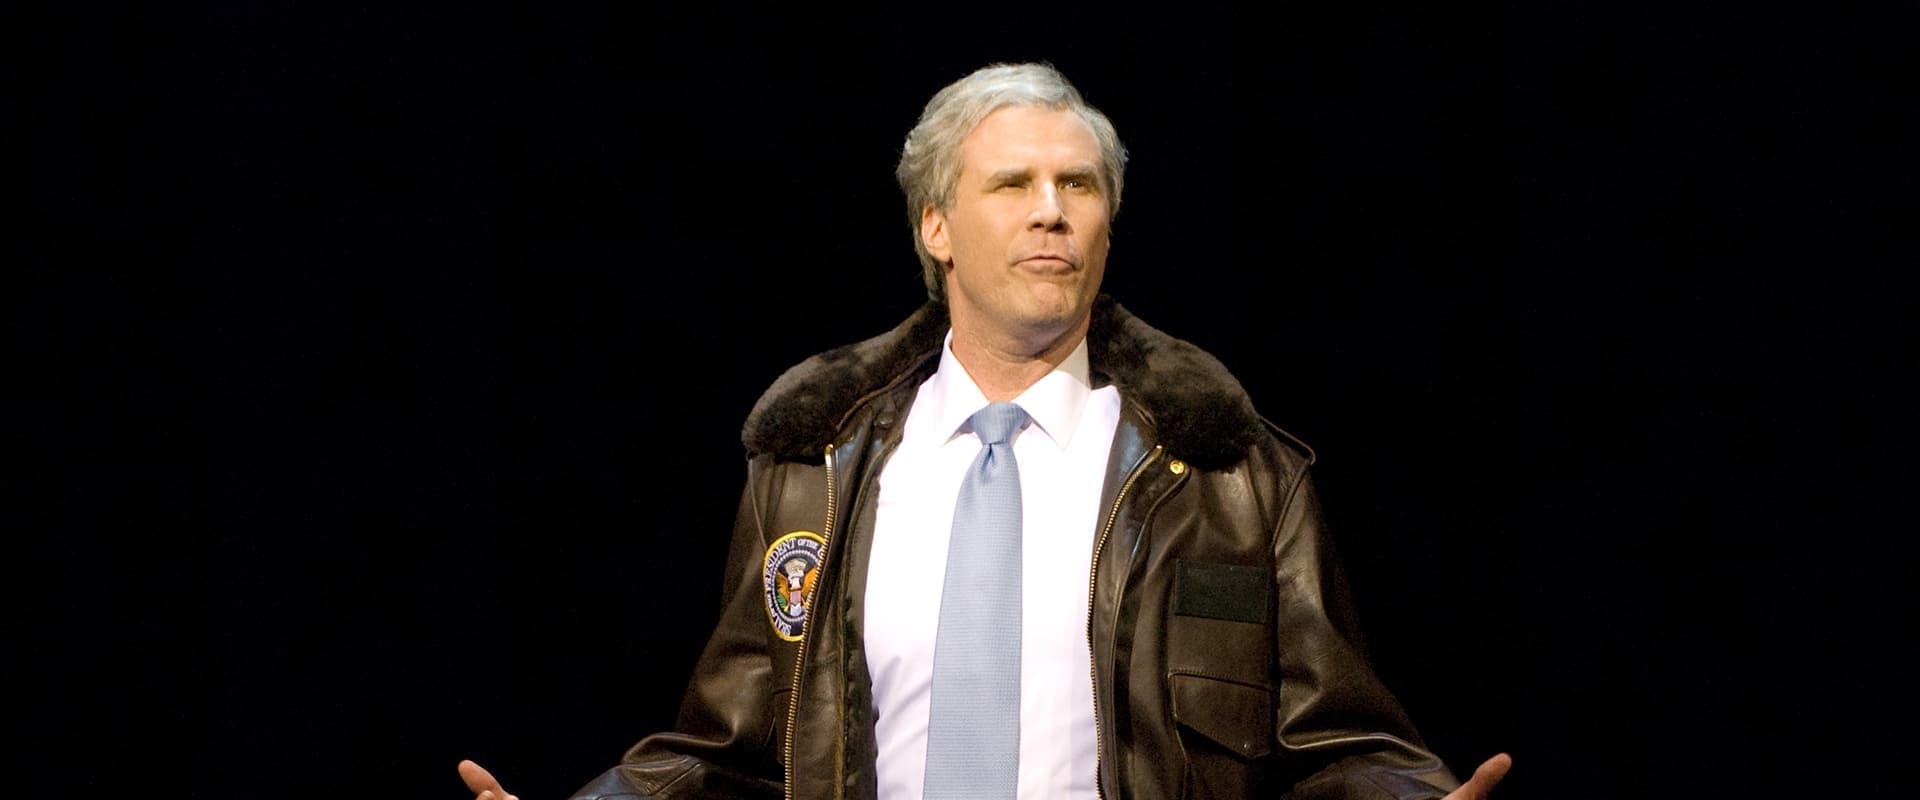 Will Ferrell: You're Welcome America - A Final Night with George W. Bush